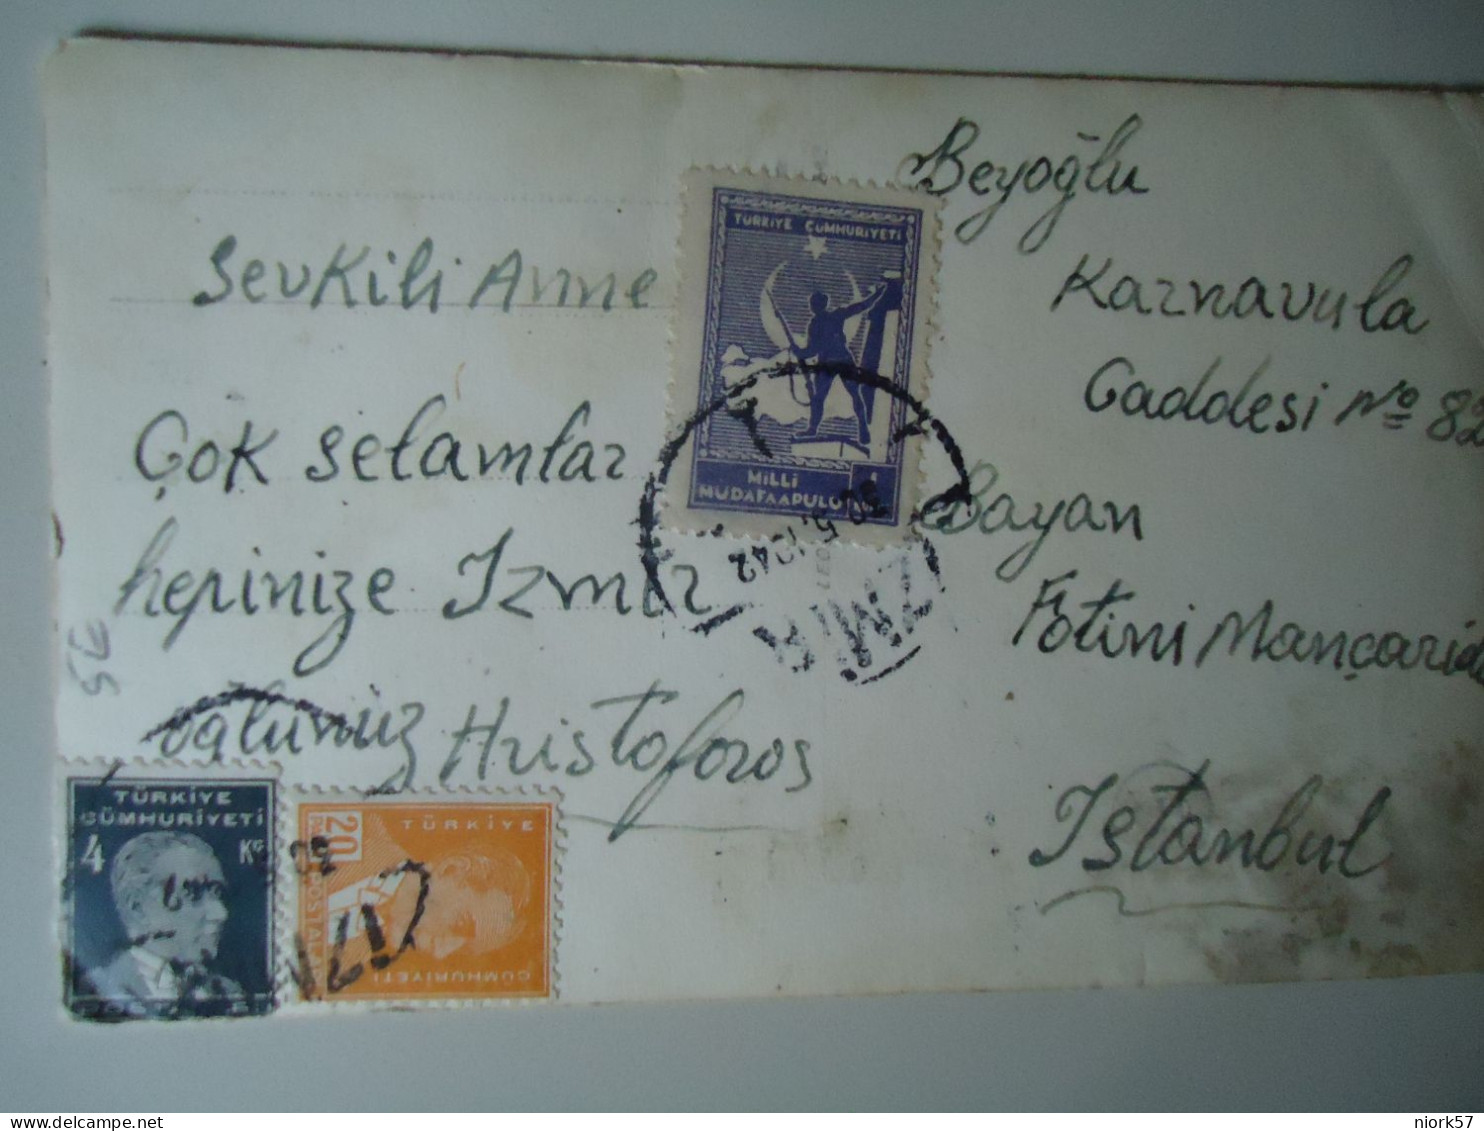 TURKEY  PHOTO  POSTCARDS  1942   ΣΤΗΝ ΚΩΝΣΤΑΝΤΙΝΟΥΠΛΗ  CONSTANTINOPLE 3 STAMPS IZMIR  FOR MORE PURCHASES 10% DISCOUNT - Griechenland